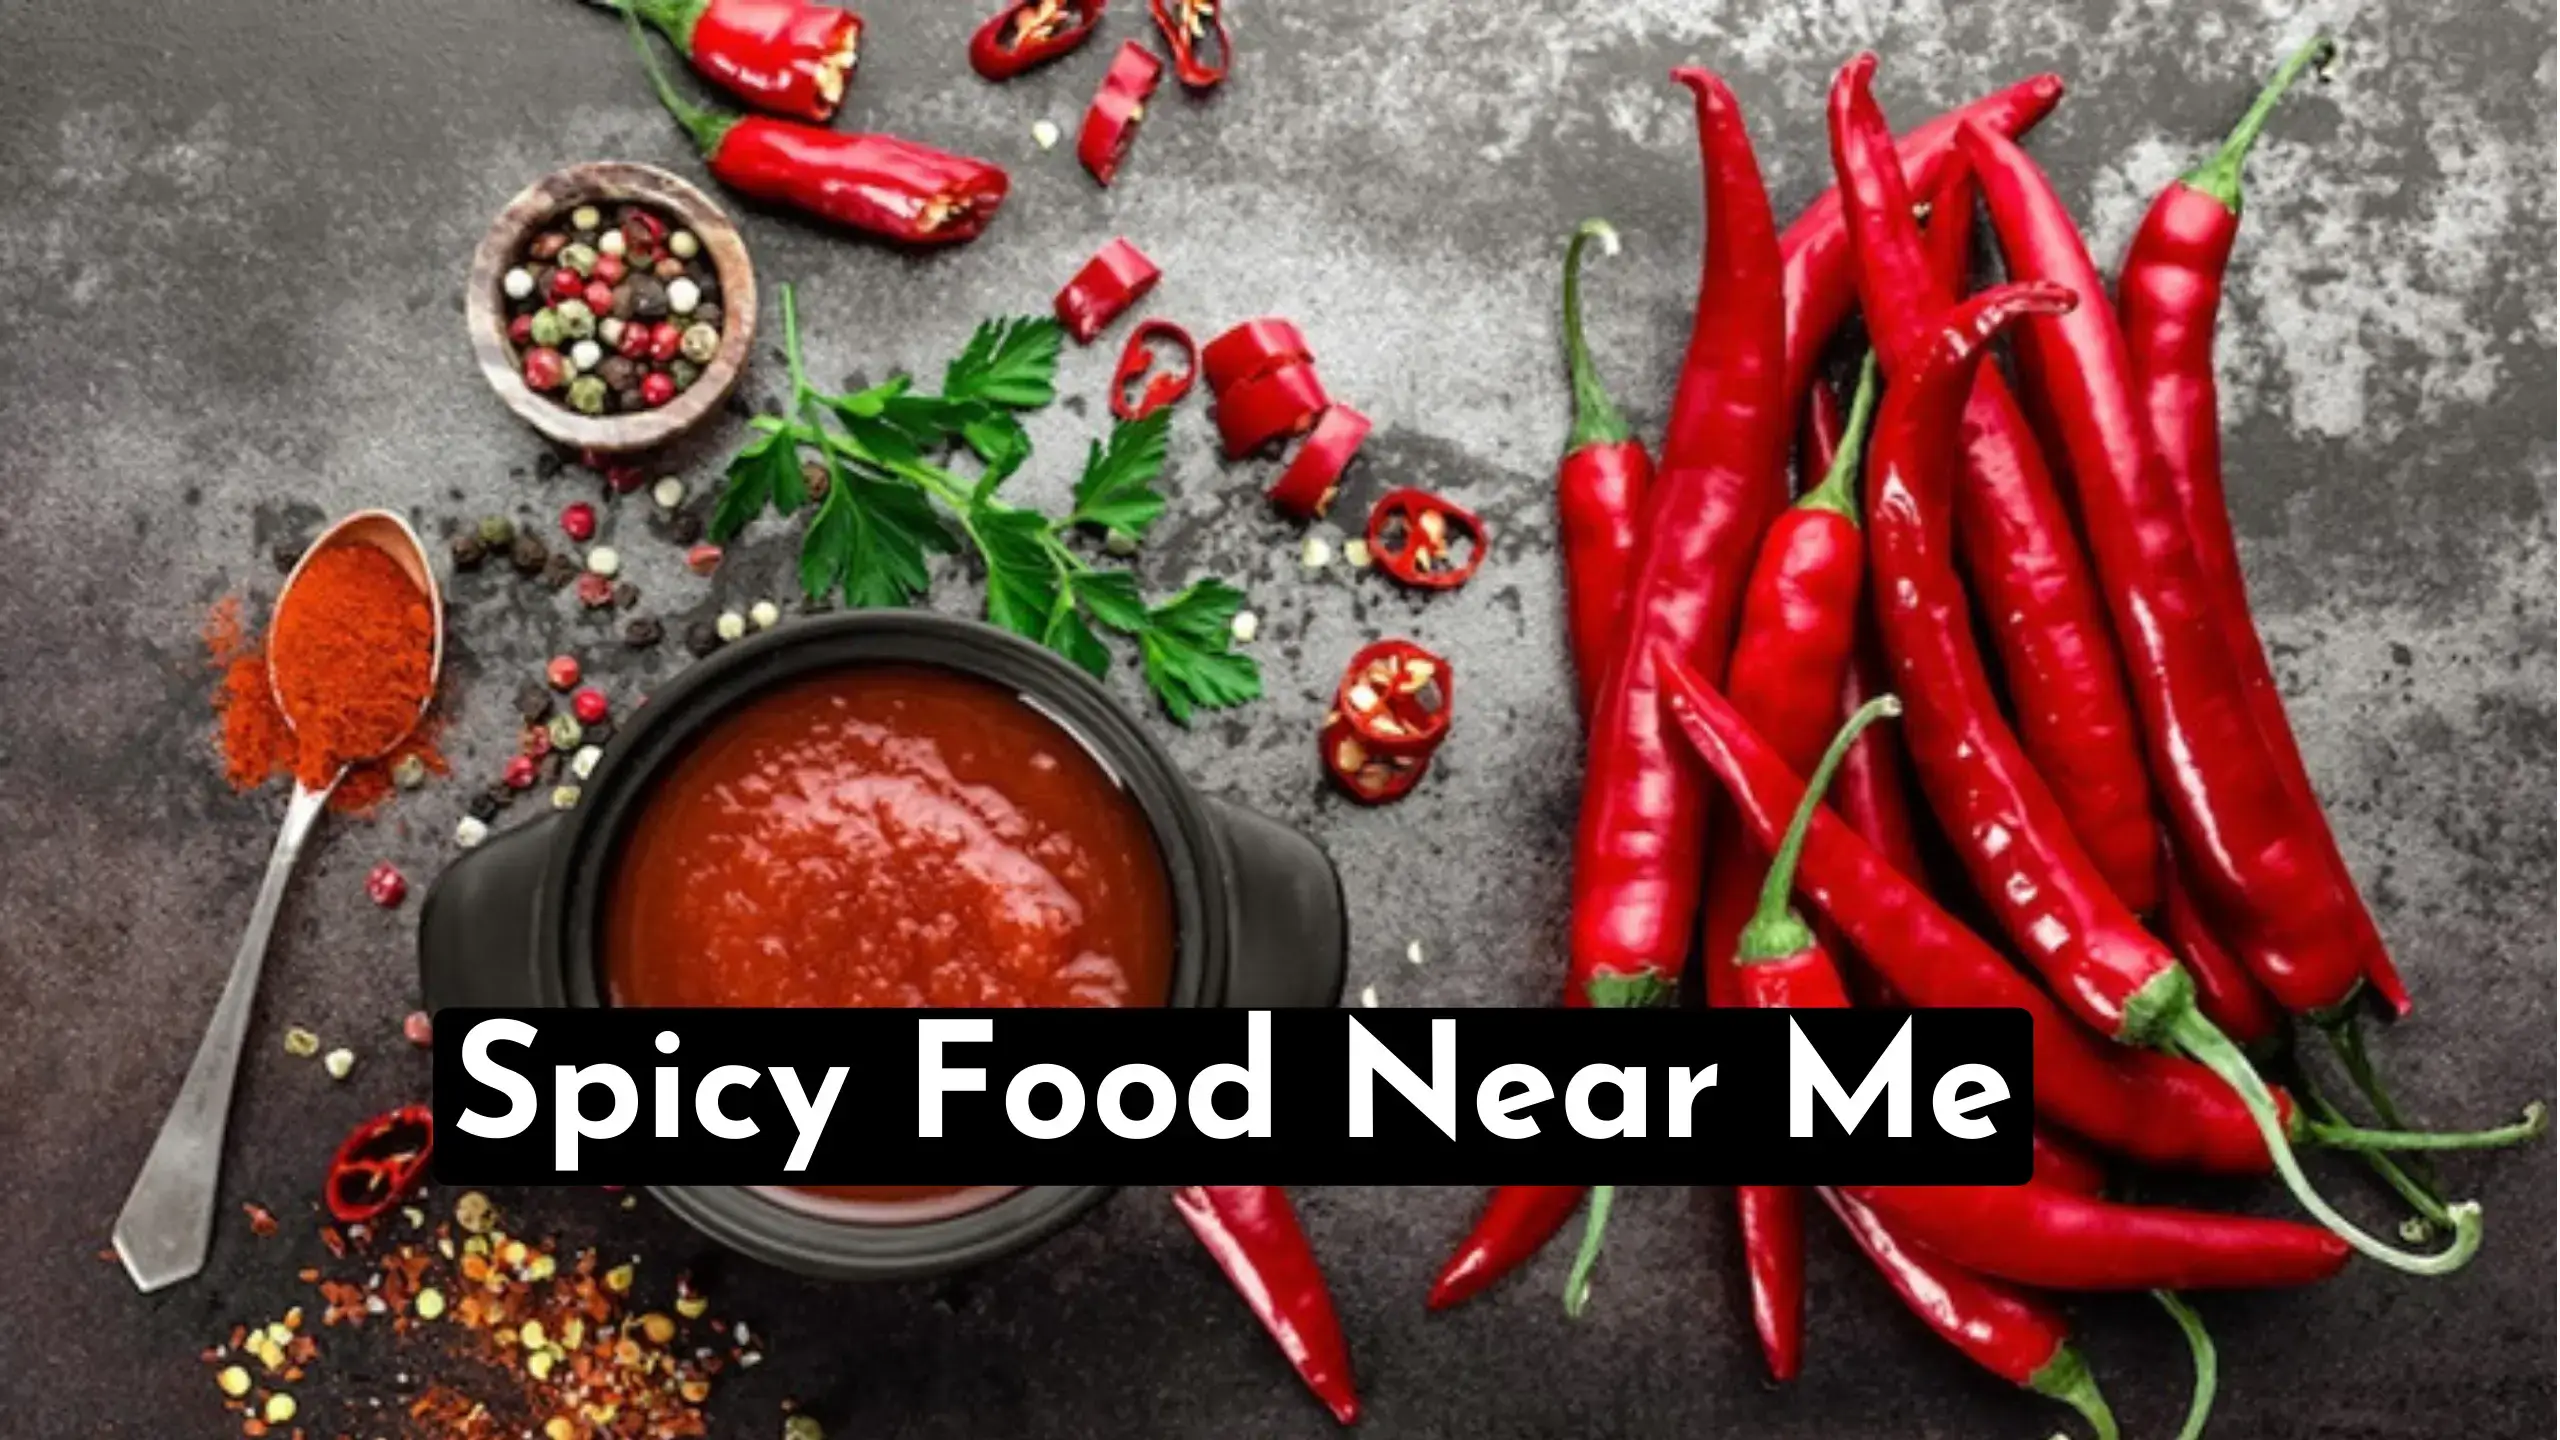 A Quick Guide To Locate Spicy Food Near Me Locations |Also Quickly Find The Best Restaurants Nearby And The Best Dishes For Your Mood To Eat.